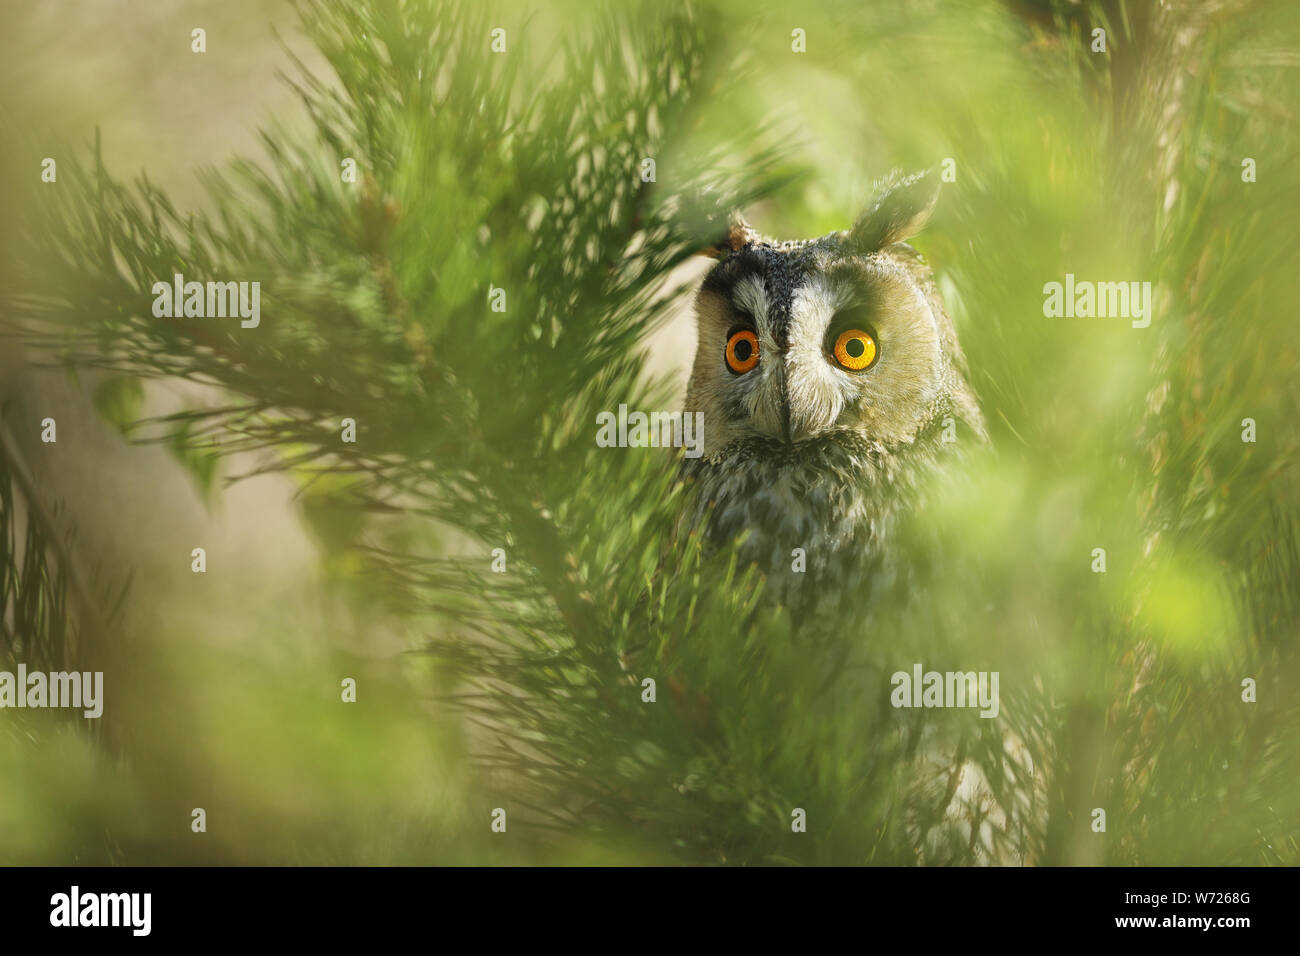 Portrait of a nothern long-eared owl Asio otus. Wild bird in a natural habitat. Stock Photo